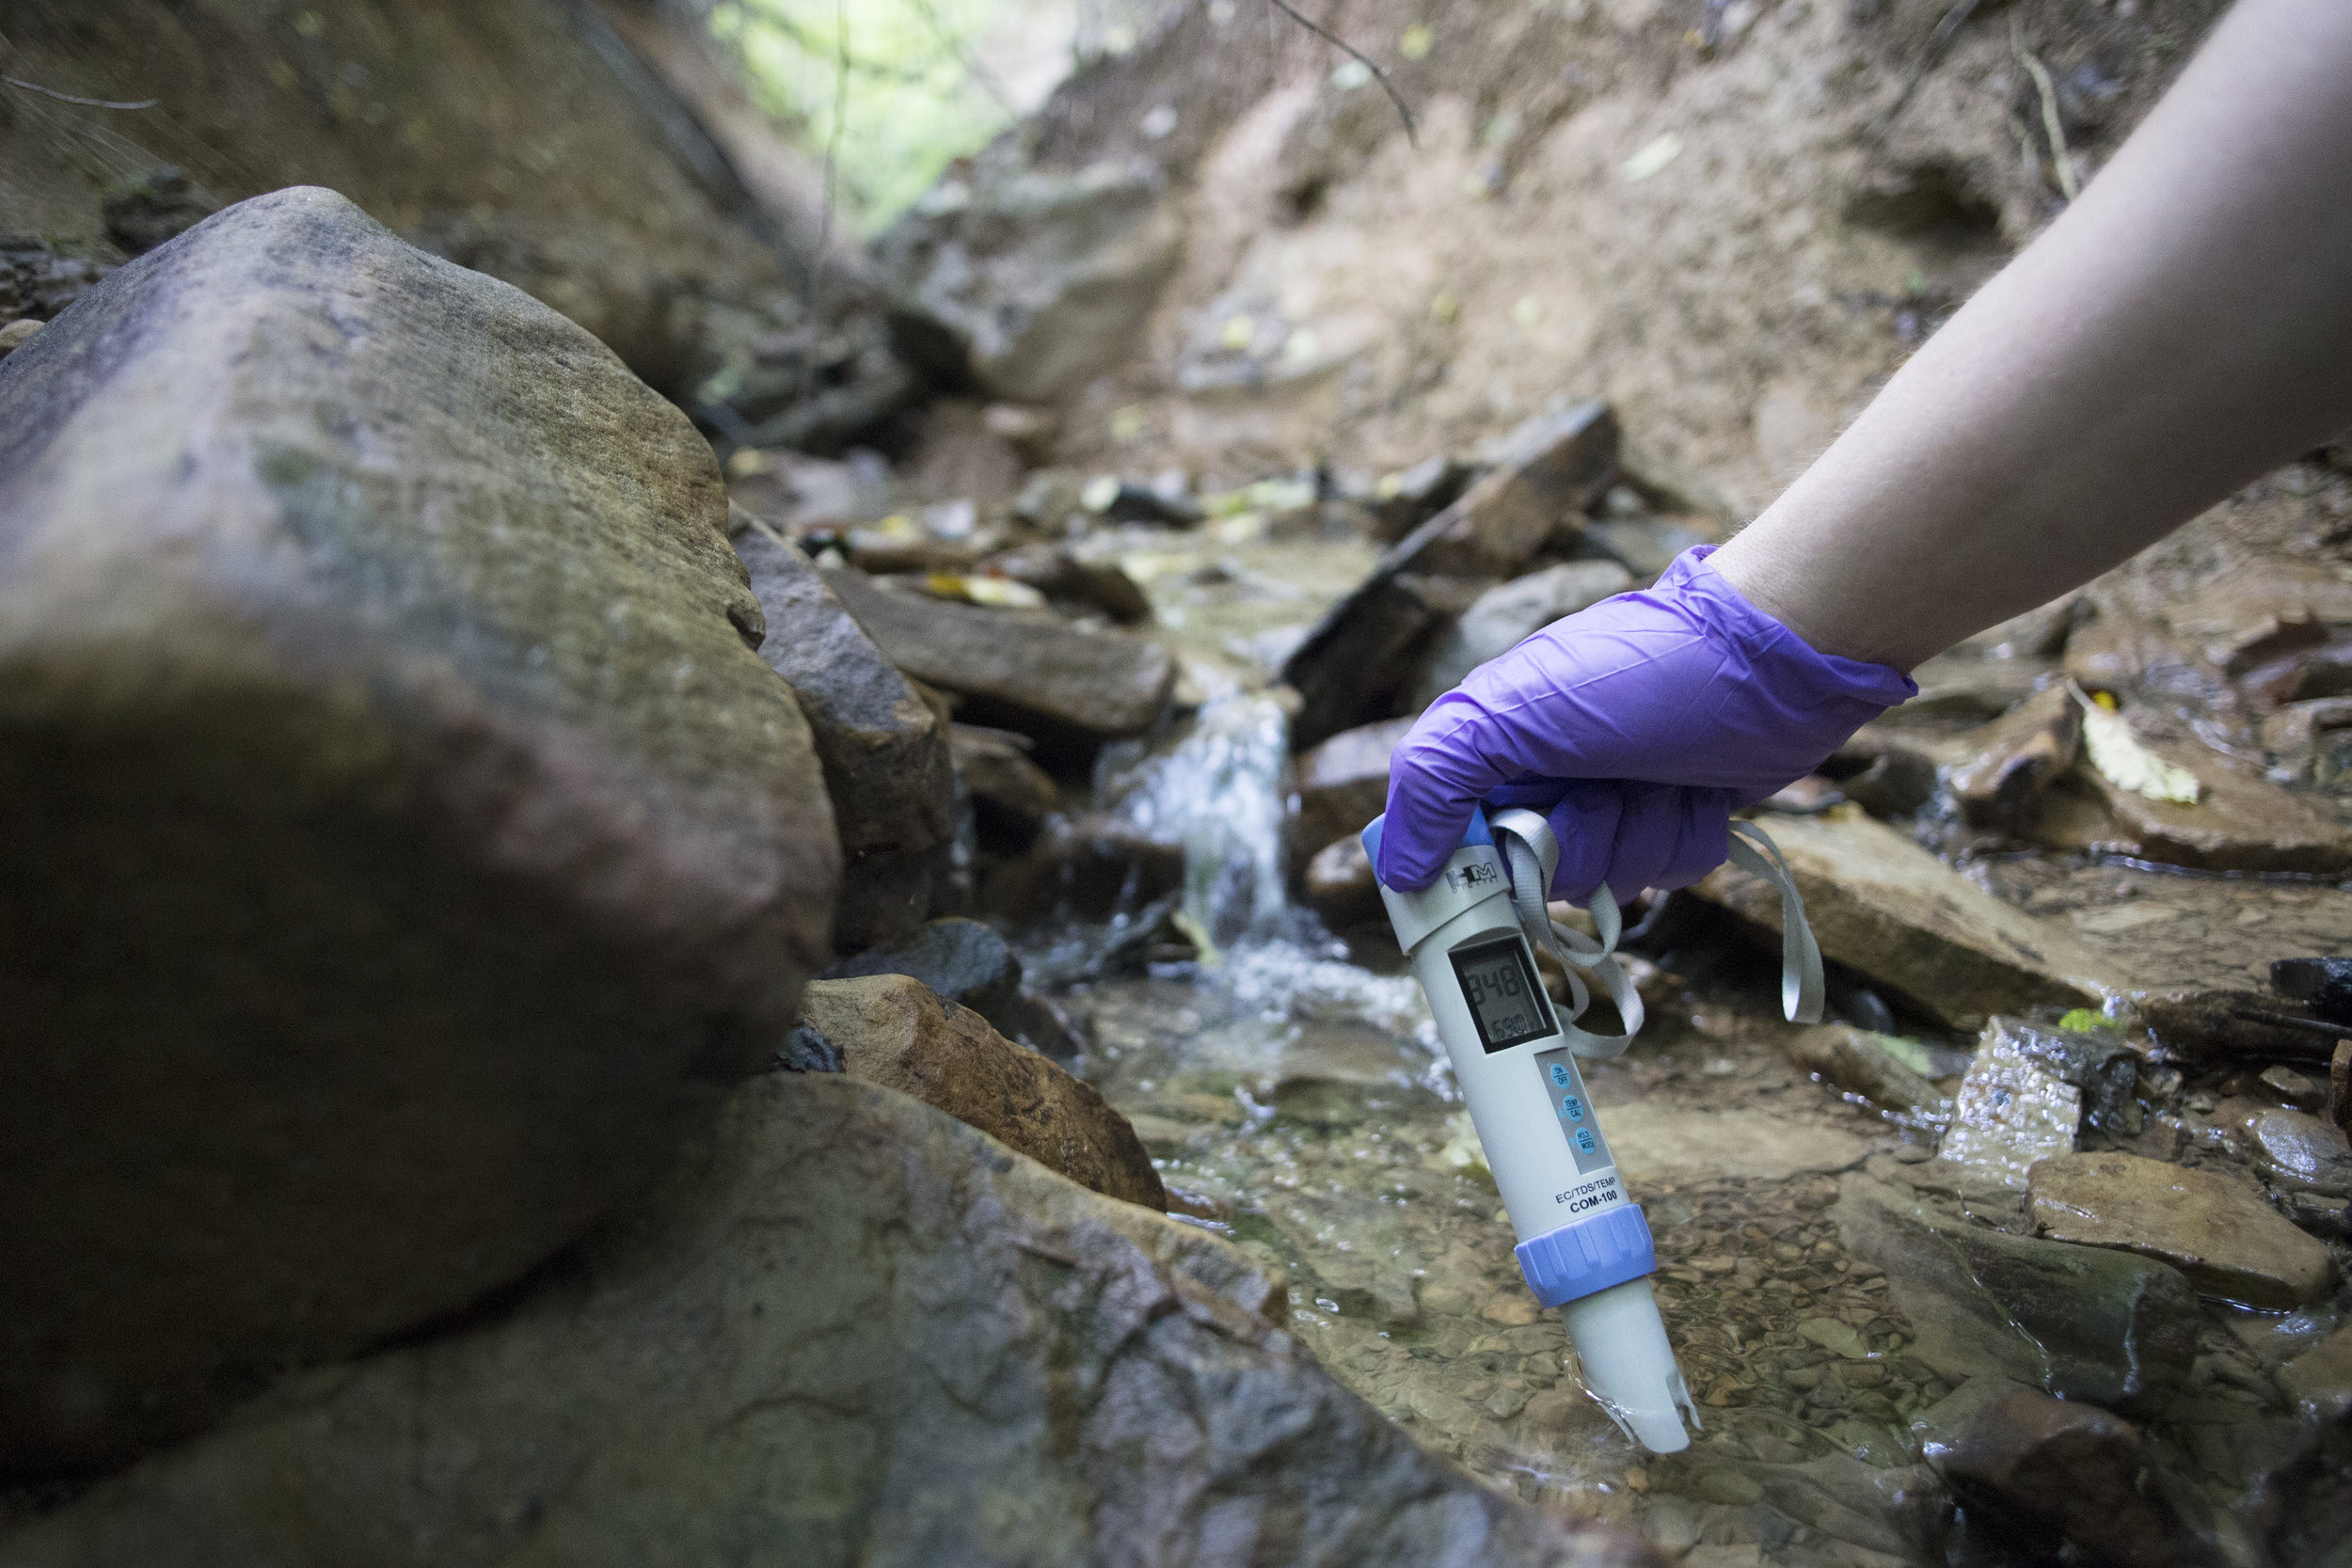  Water-quality levels in streams near central Appalachian coalfields are “acutely lethal” to macroinvertebrates, fish, and birds, according to a 2011 EPA study. However, the effects of these levels to humans are largely unknown. 